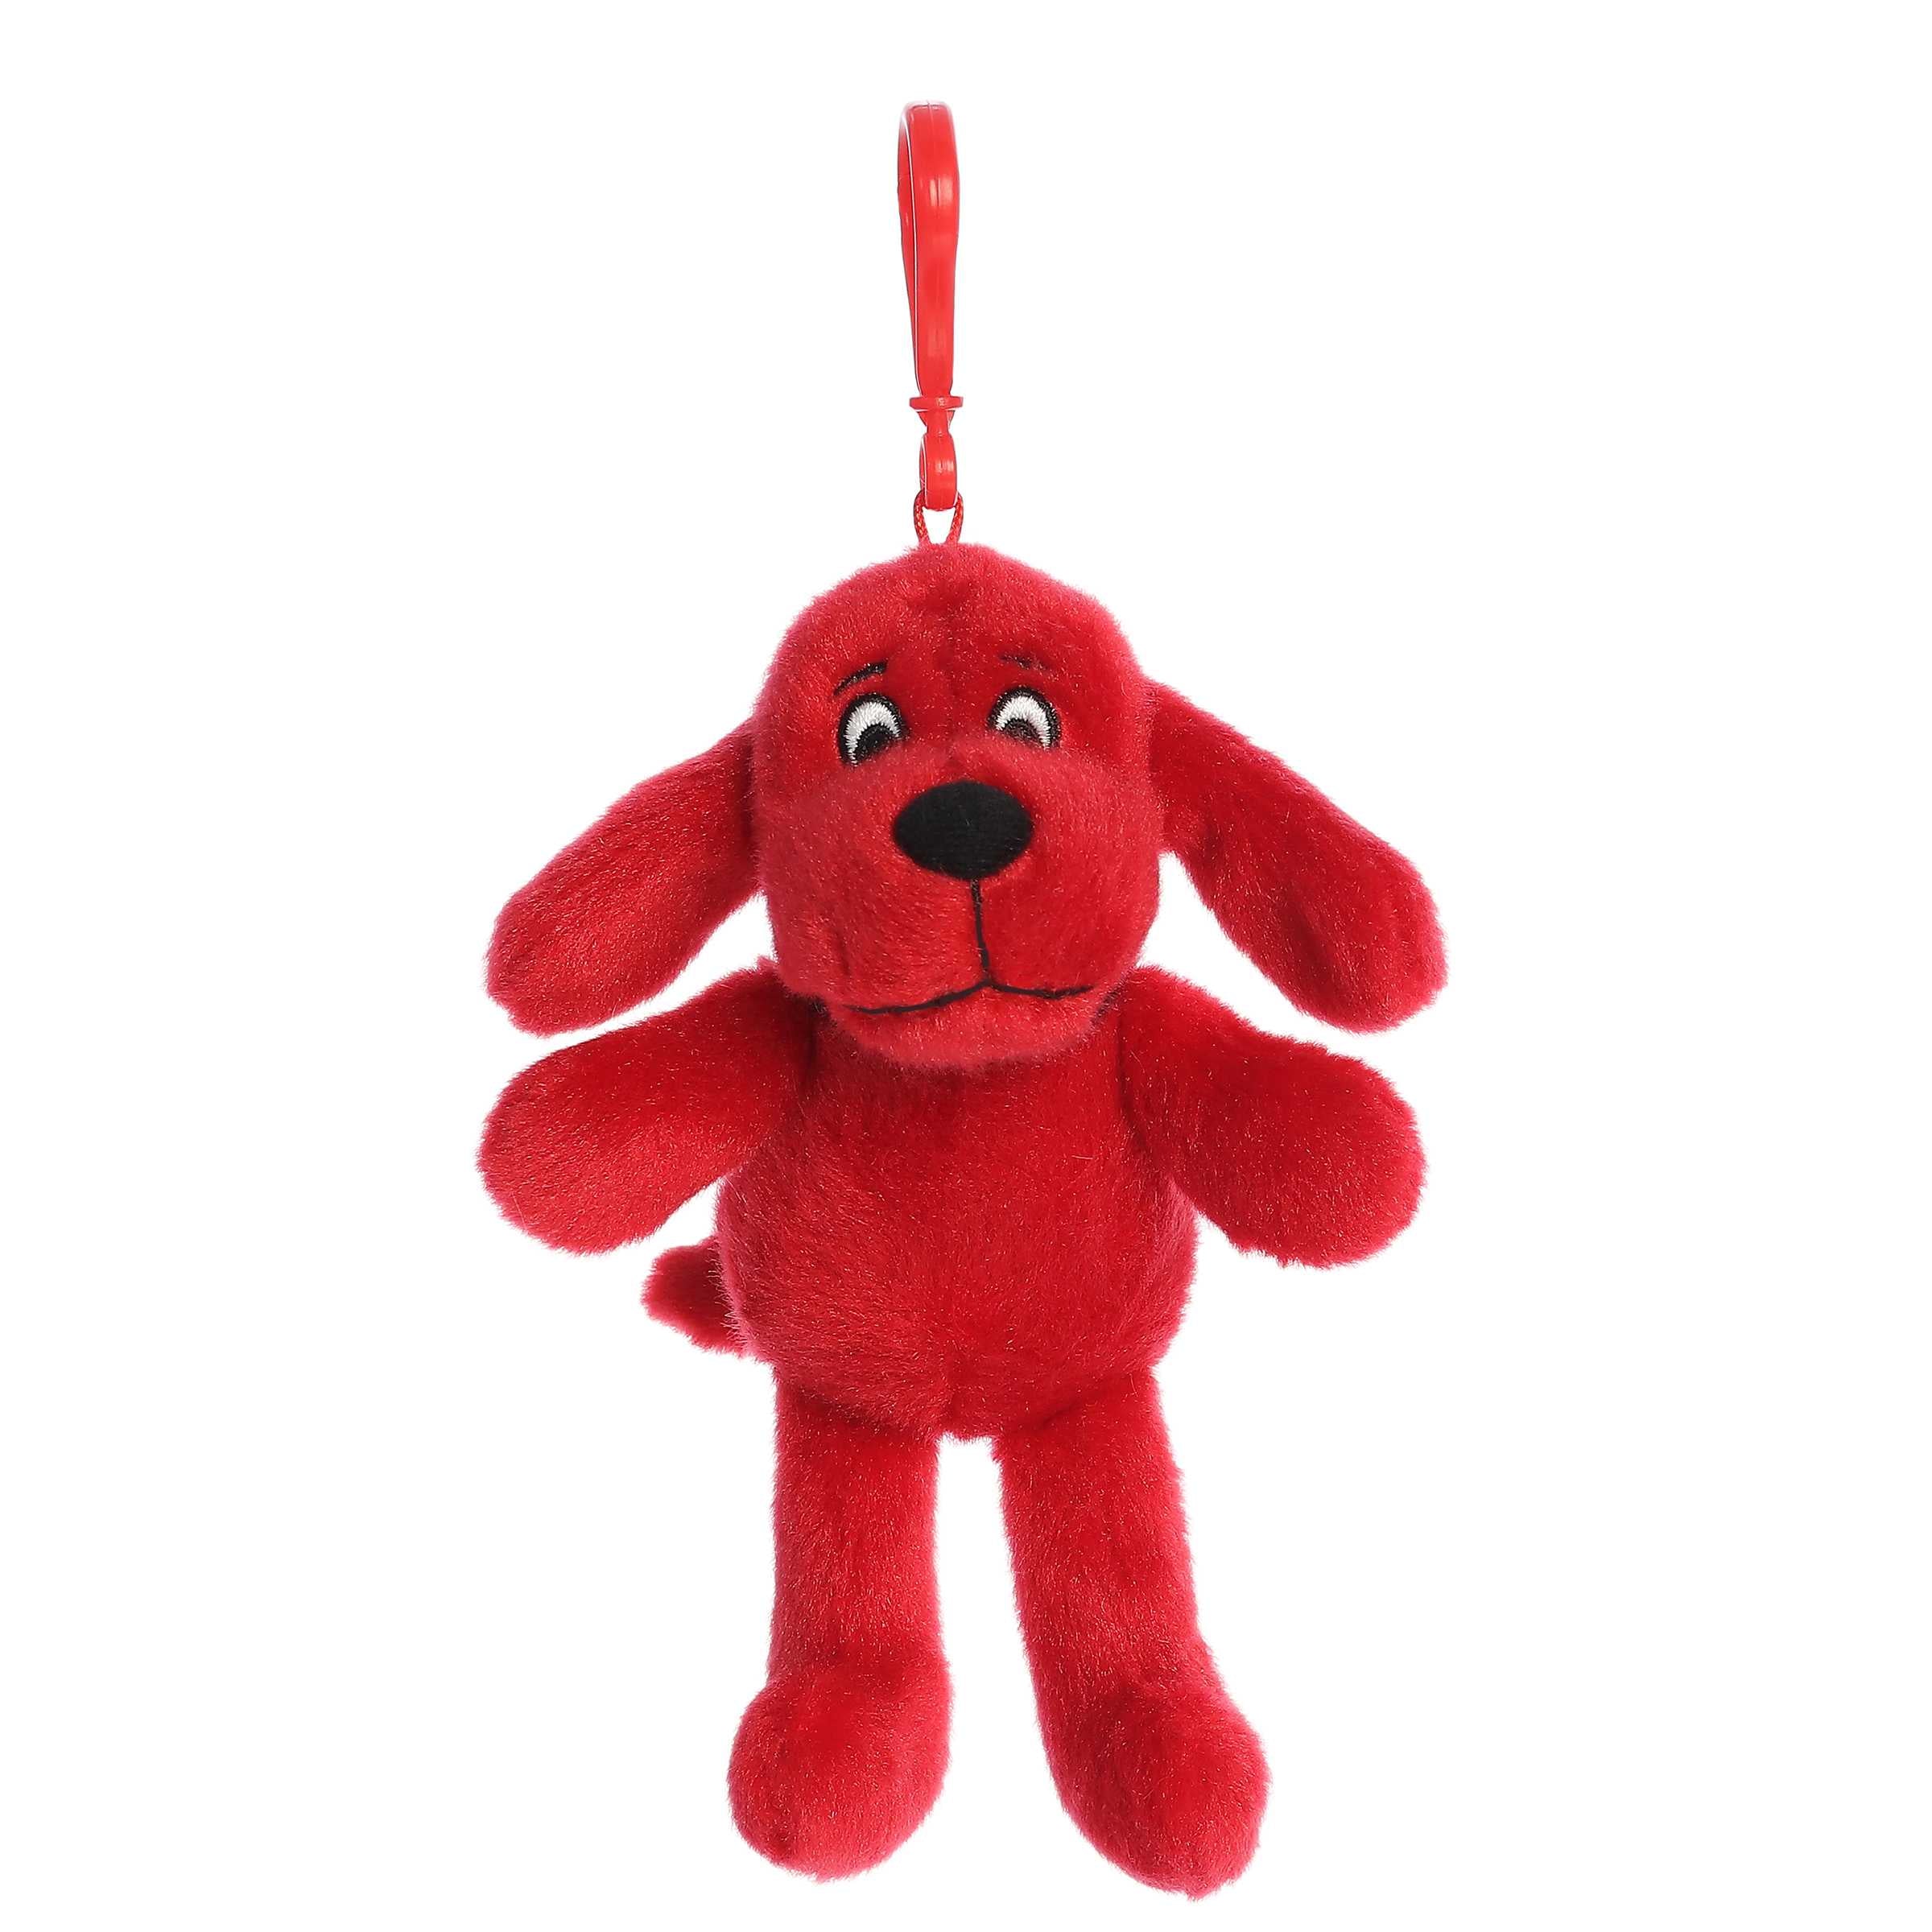 Clifford Clip-On' plush keychain, soft and red, featuring Clifford's friendly face, perfect for adding to backpacks or keys.